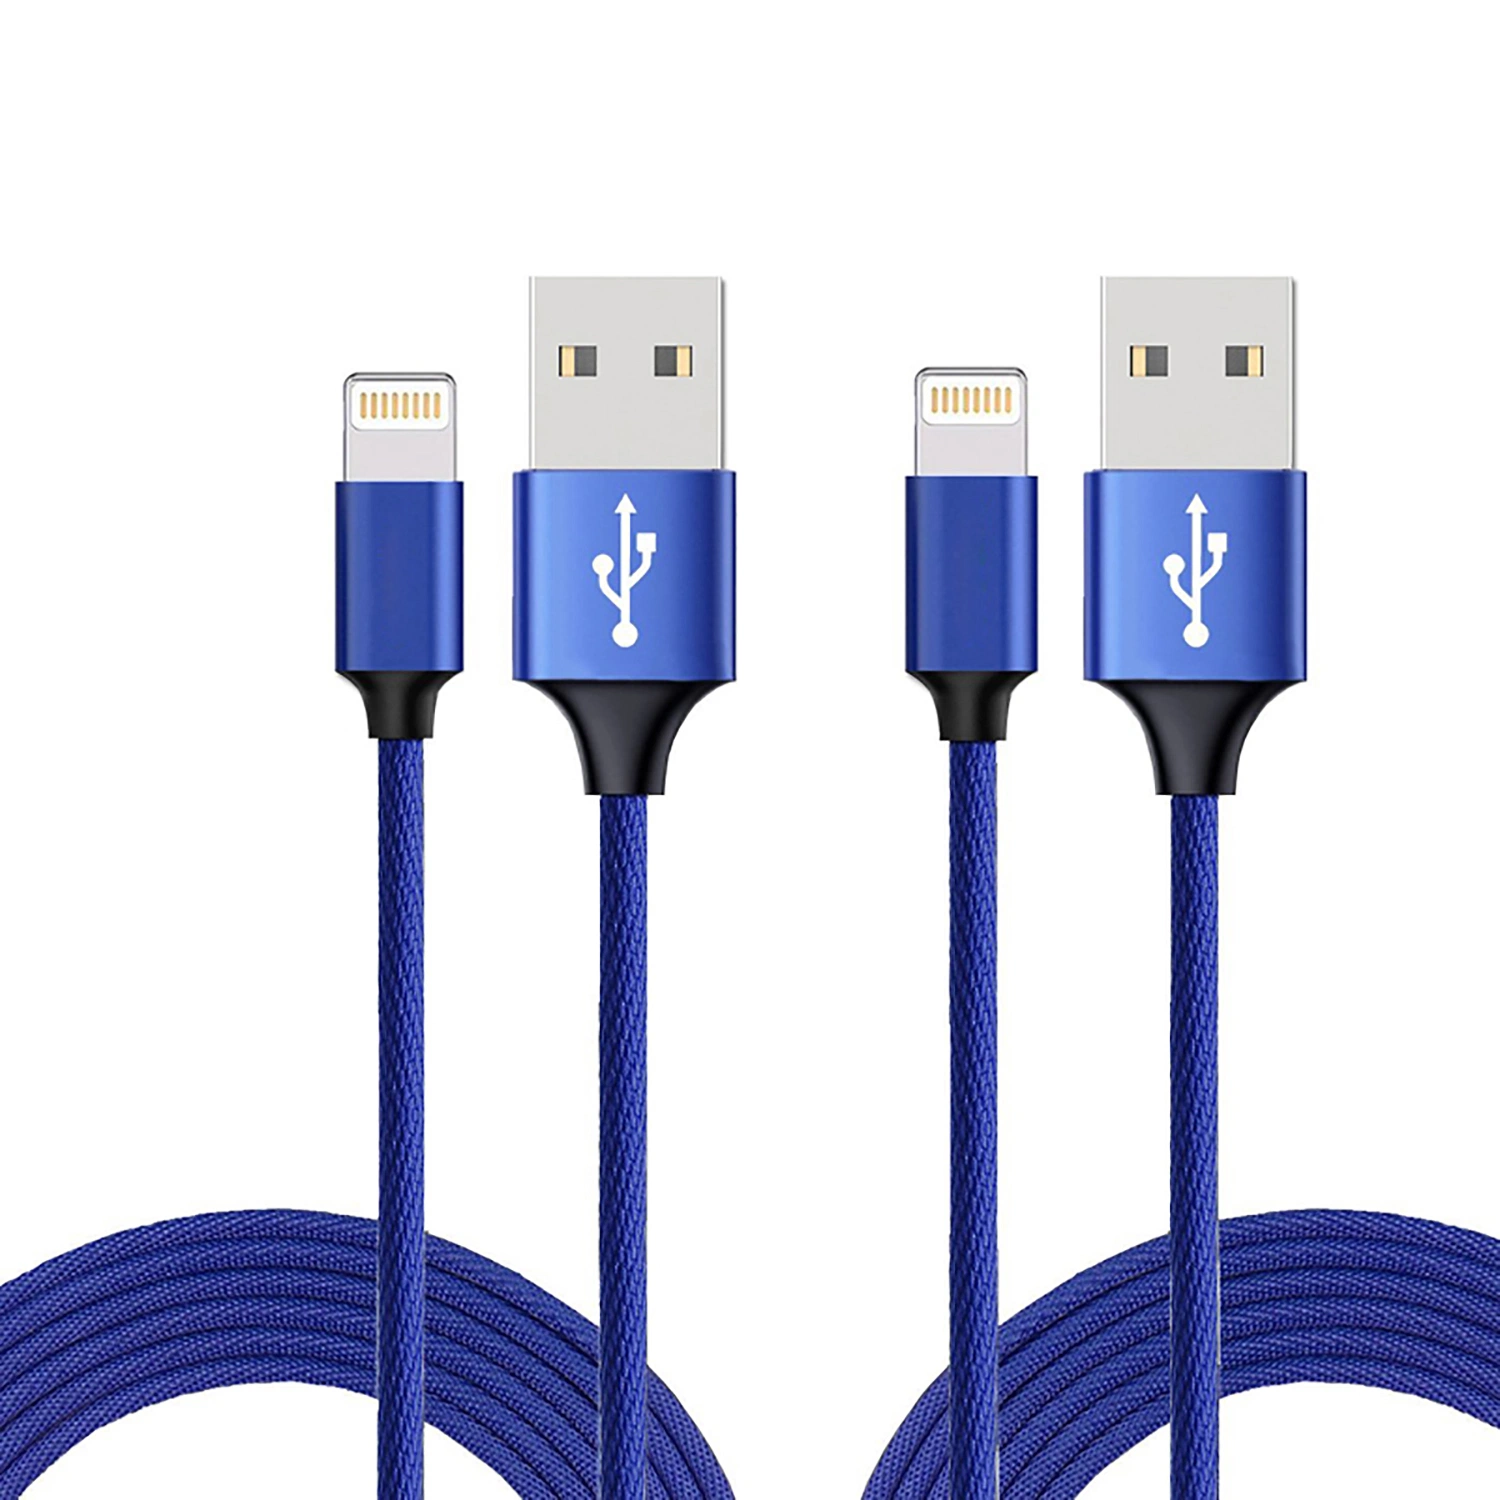 1m 2m 3m 3FT 6FT 10FT New Fabric Braided 2.4A Fast Charger USB Cable for iPhone iPad Mobile Accessories